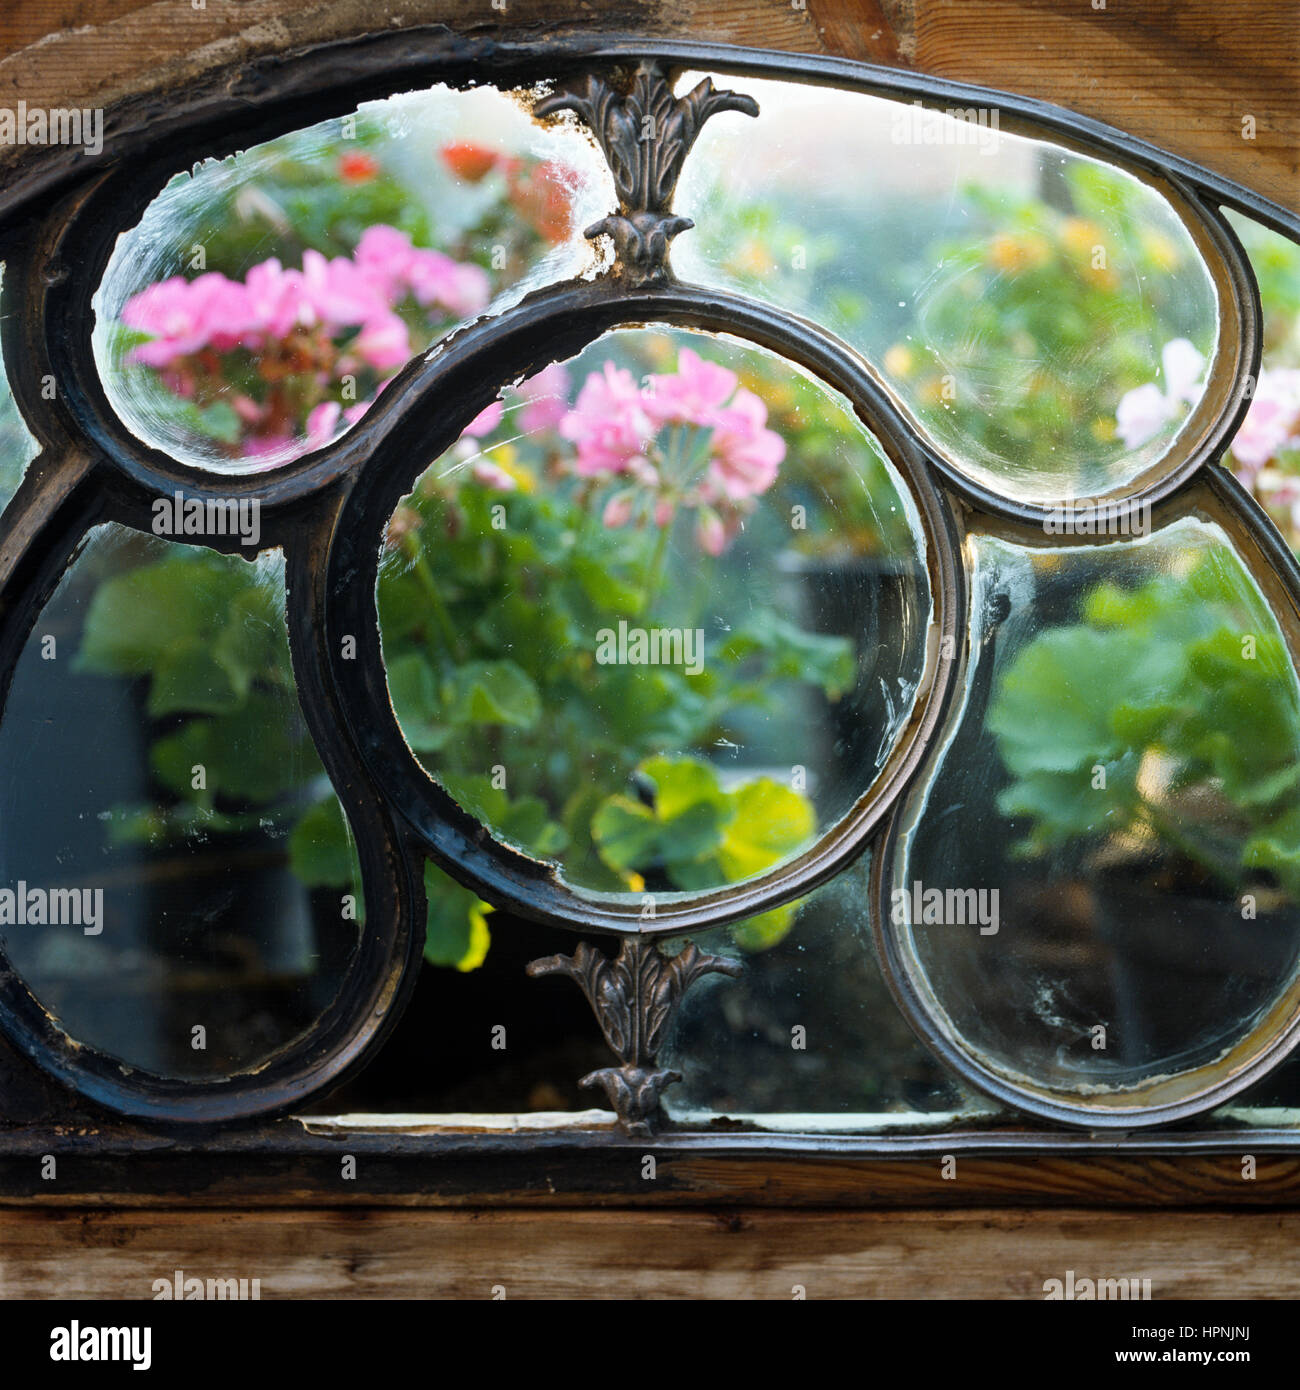 A window with flowers outside. Stock Photo